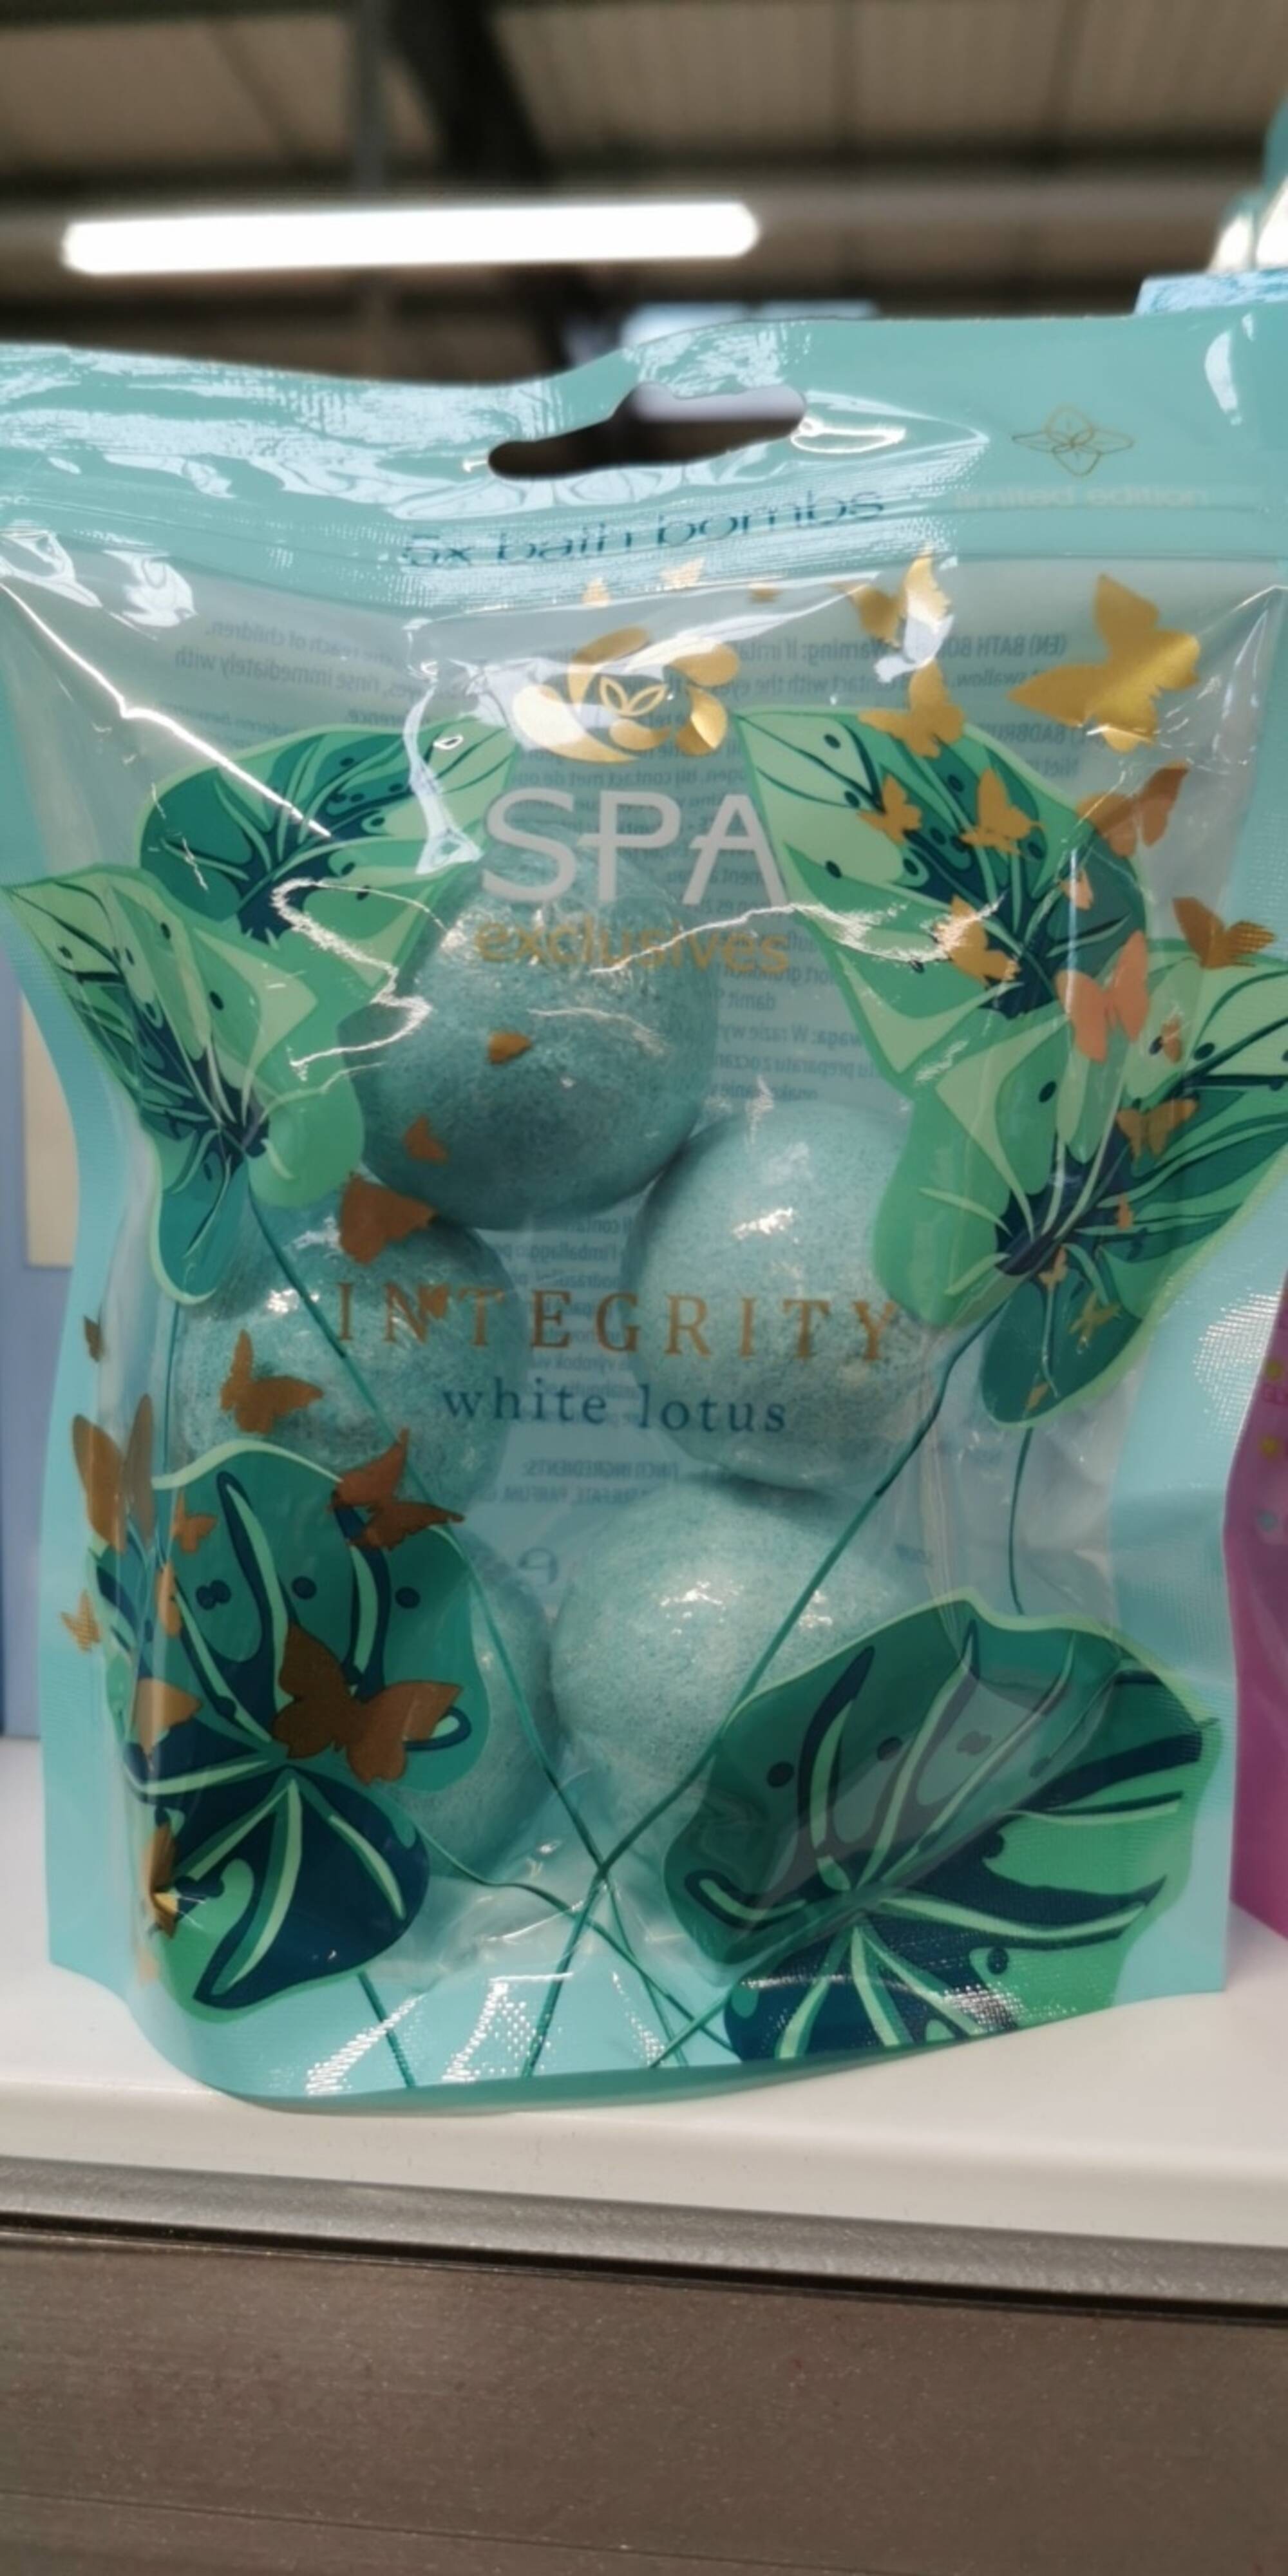 SPA EXCLUSIVES - Integrity - Bath bombs